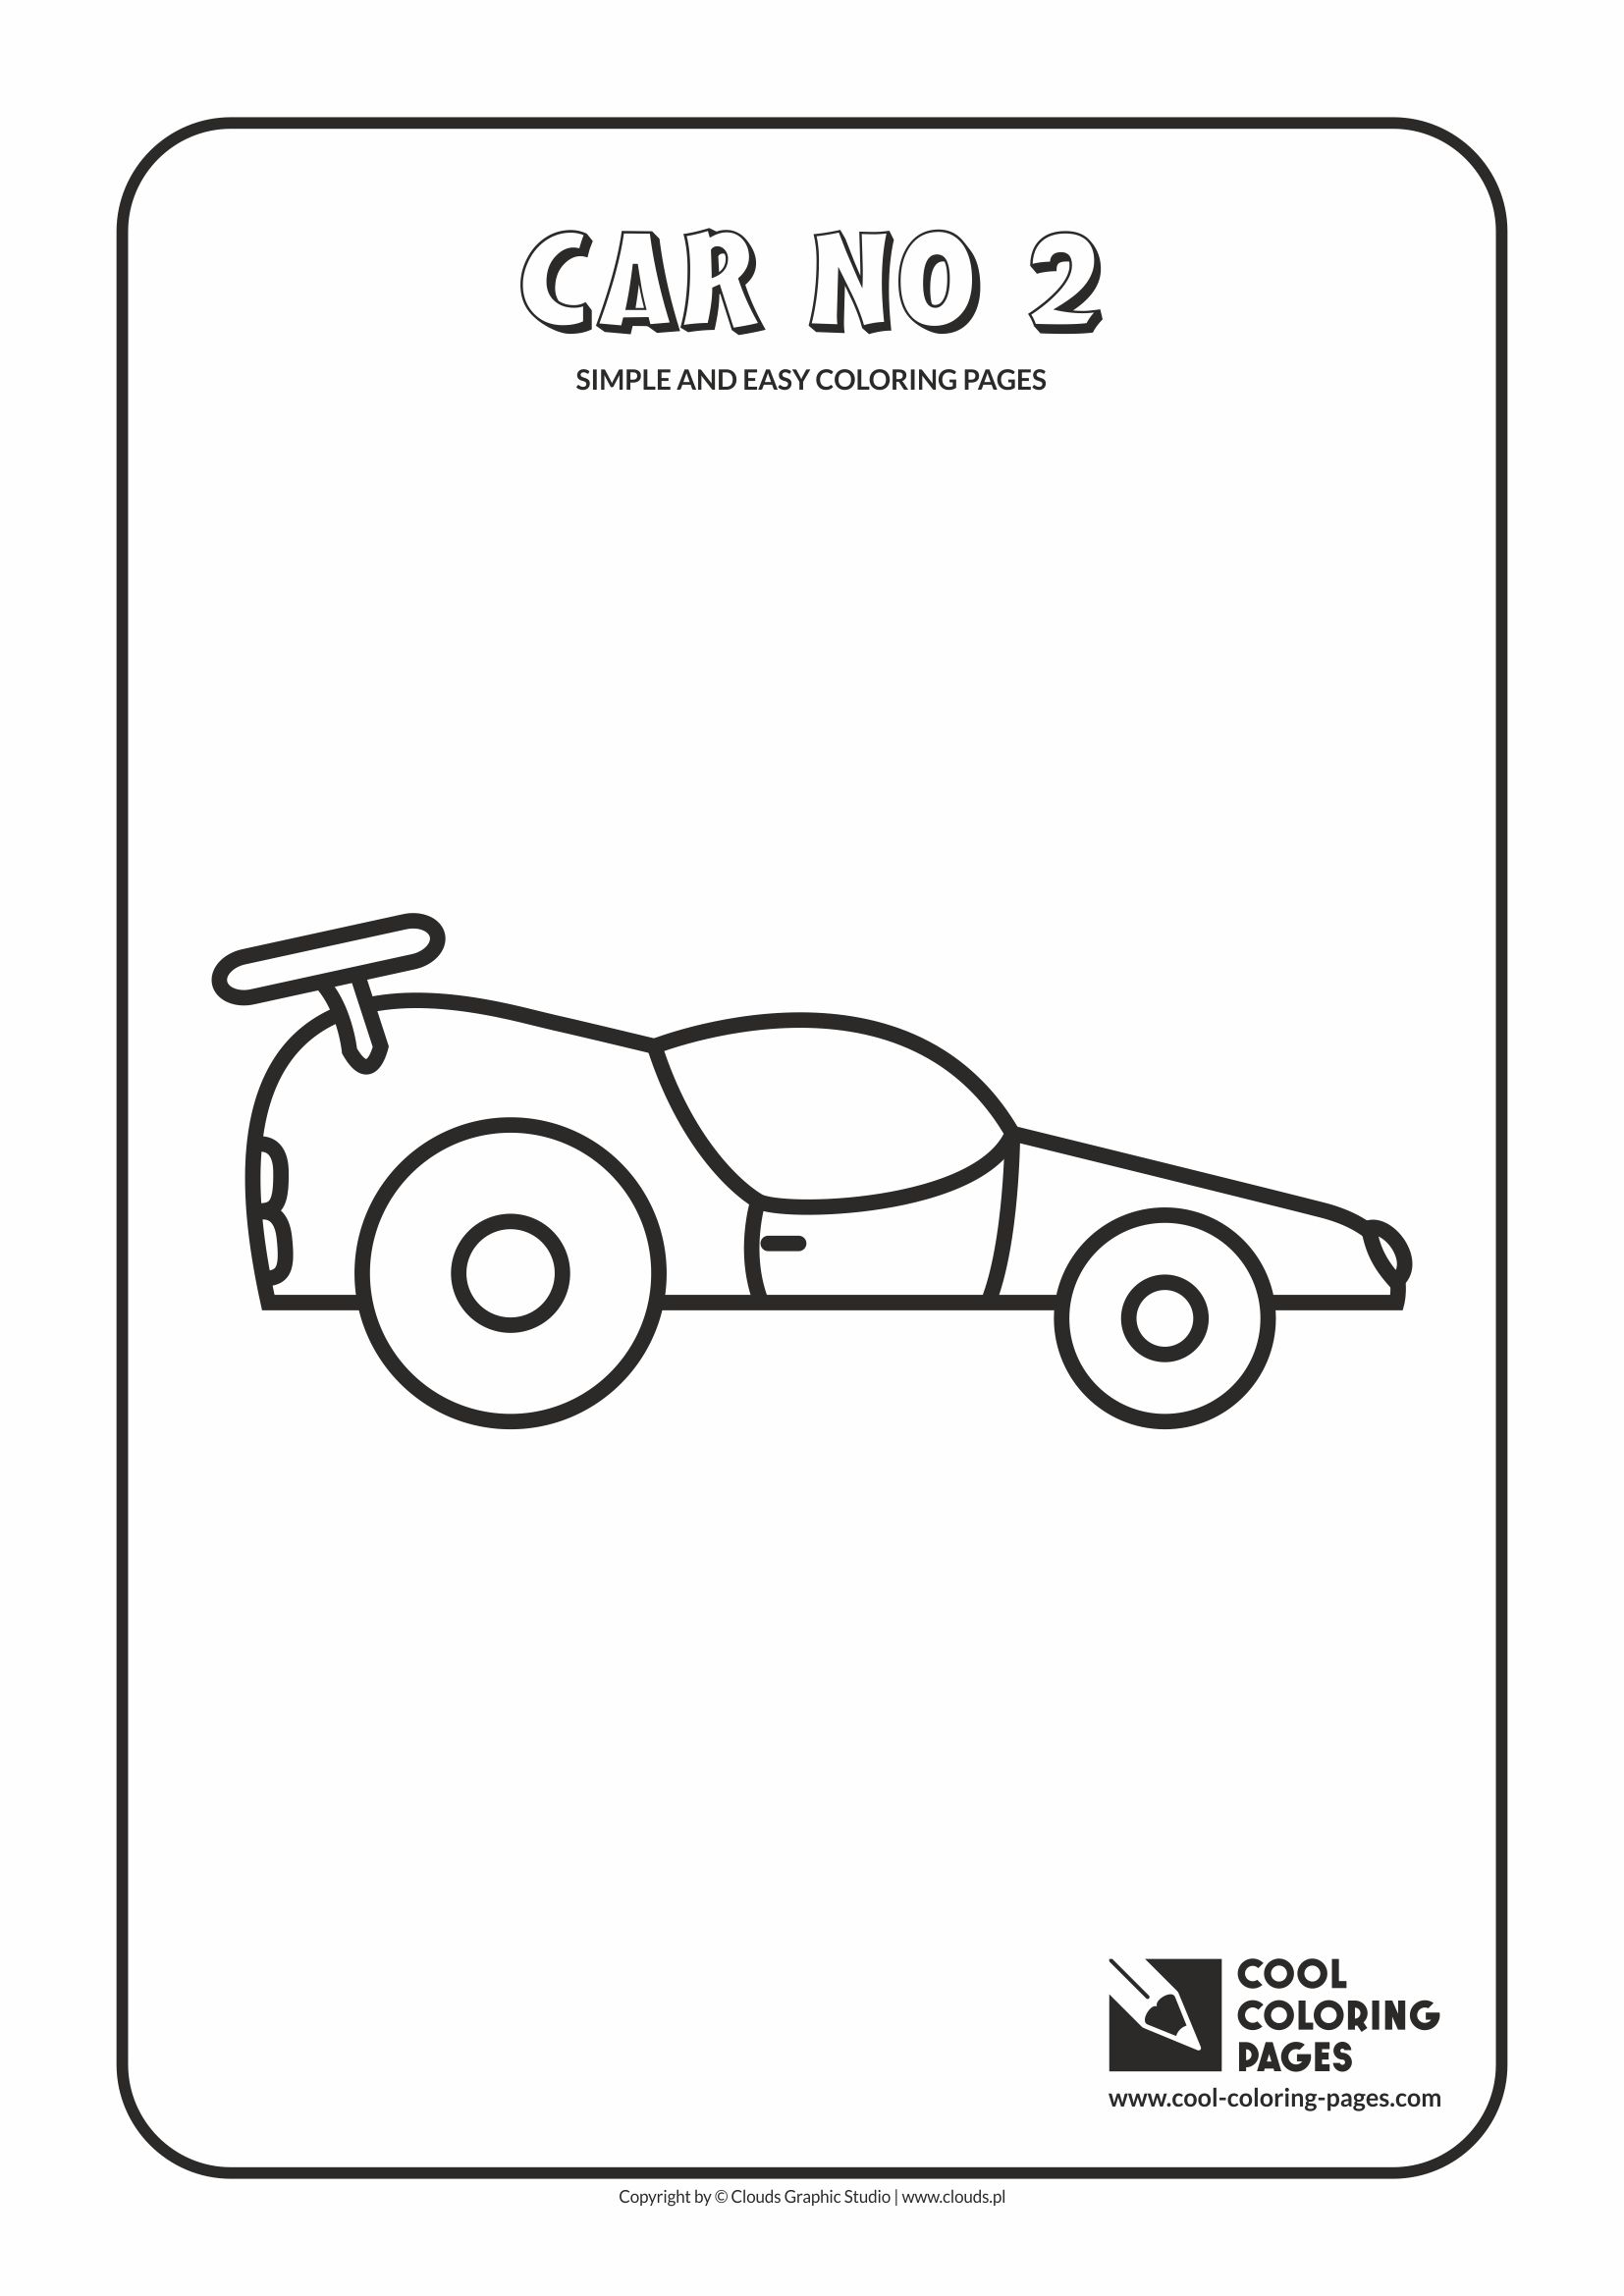 Simple and easy coloring pages for toddlers - Car no 2